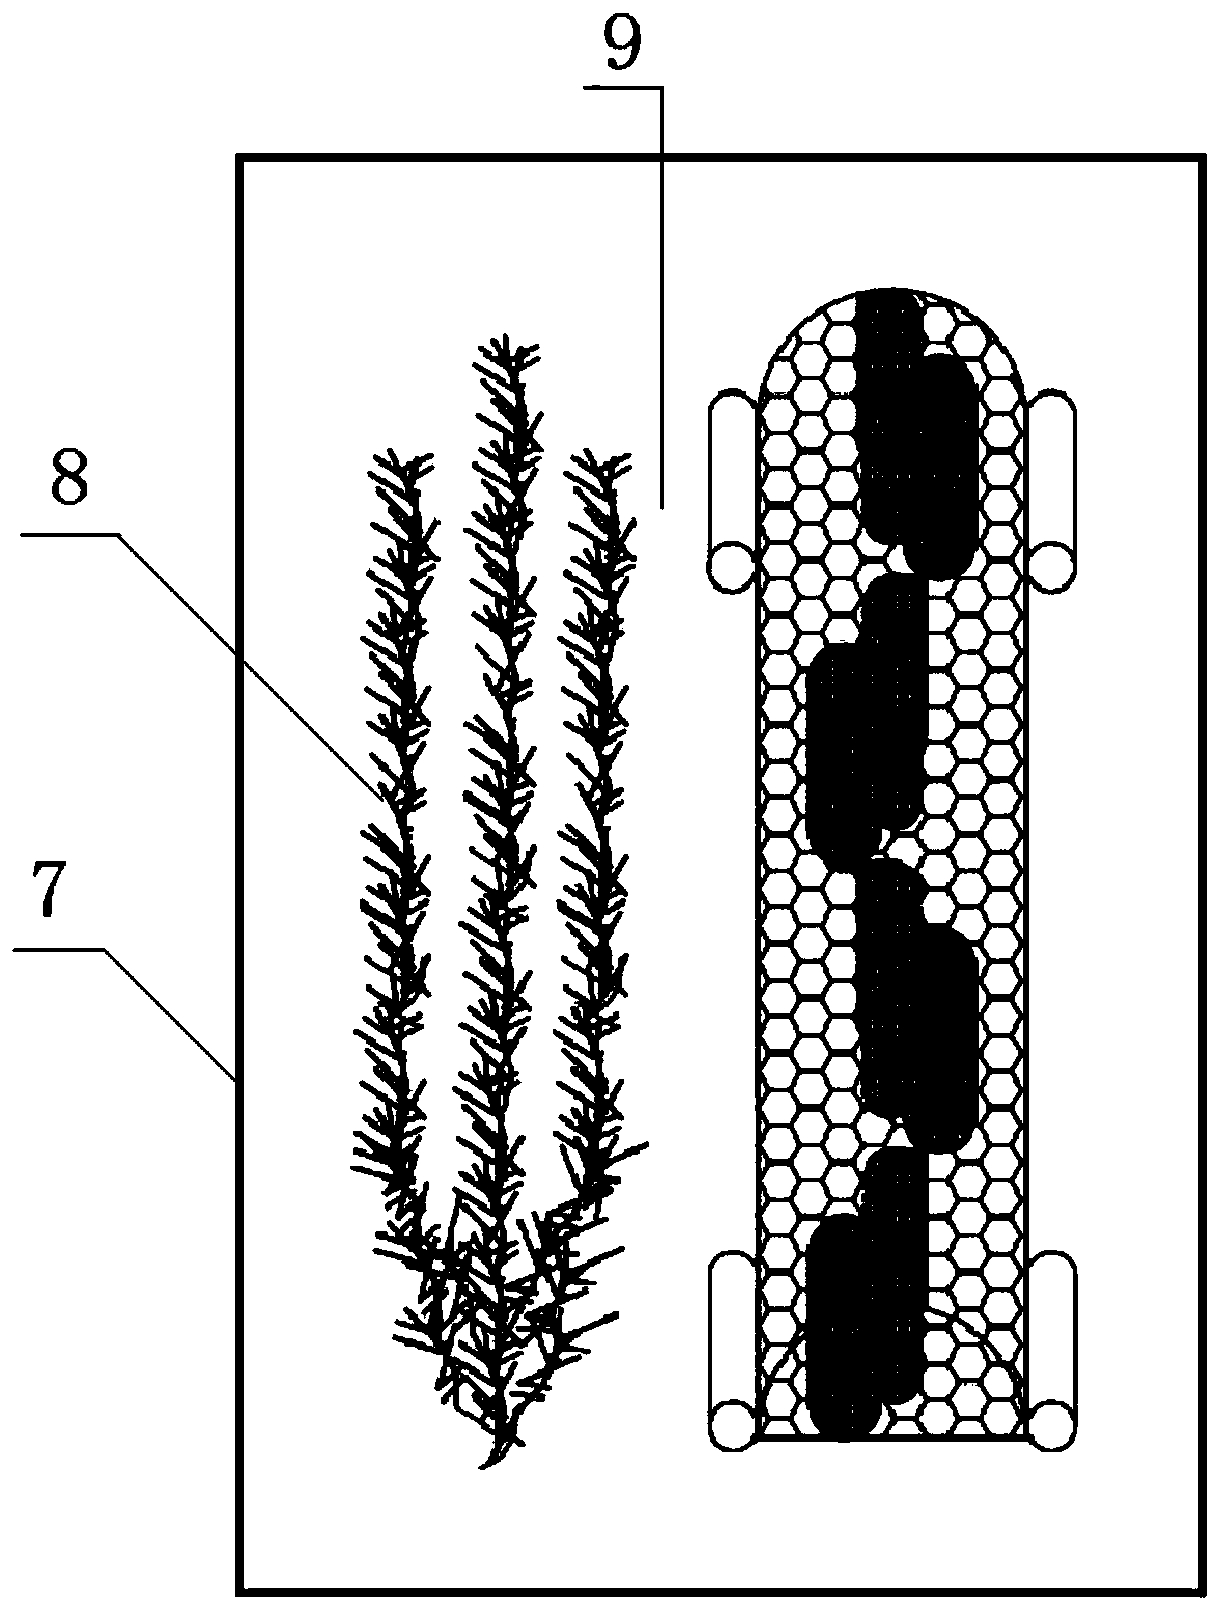 Indoor soilless procambarus clarkii culture method and artificial cave for same